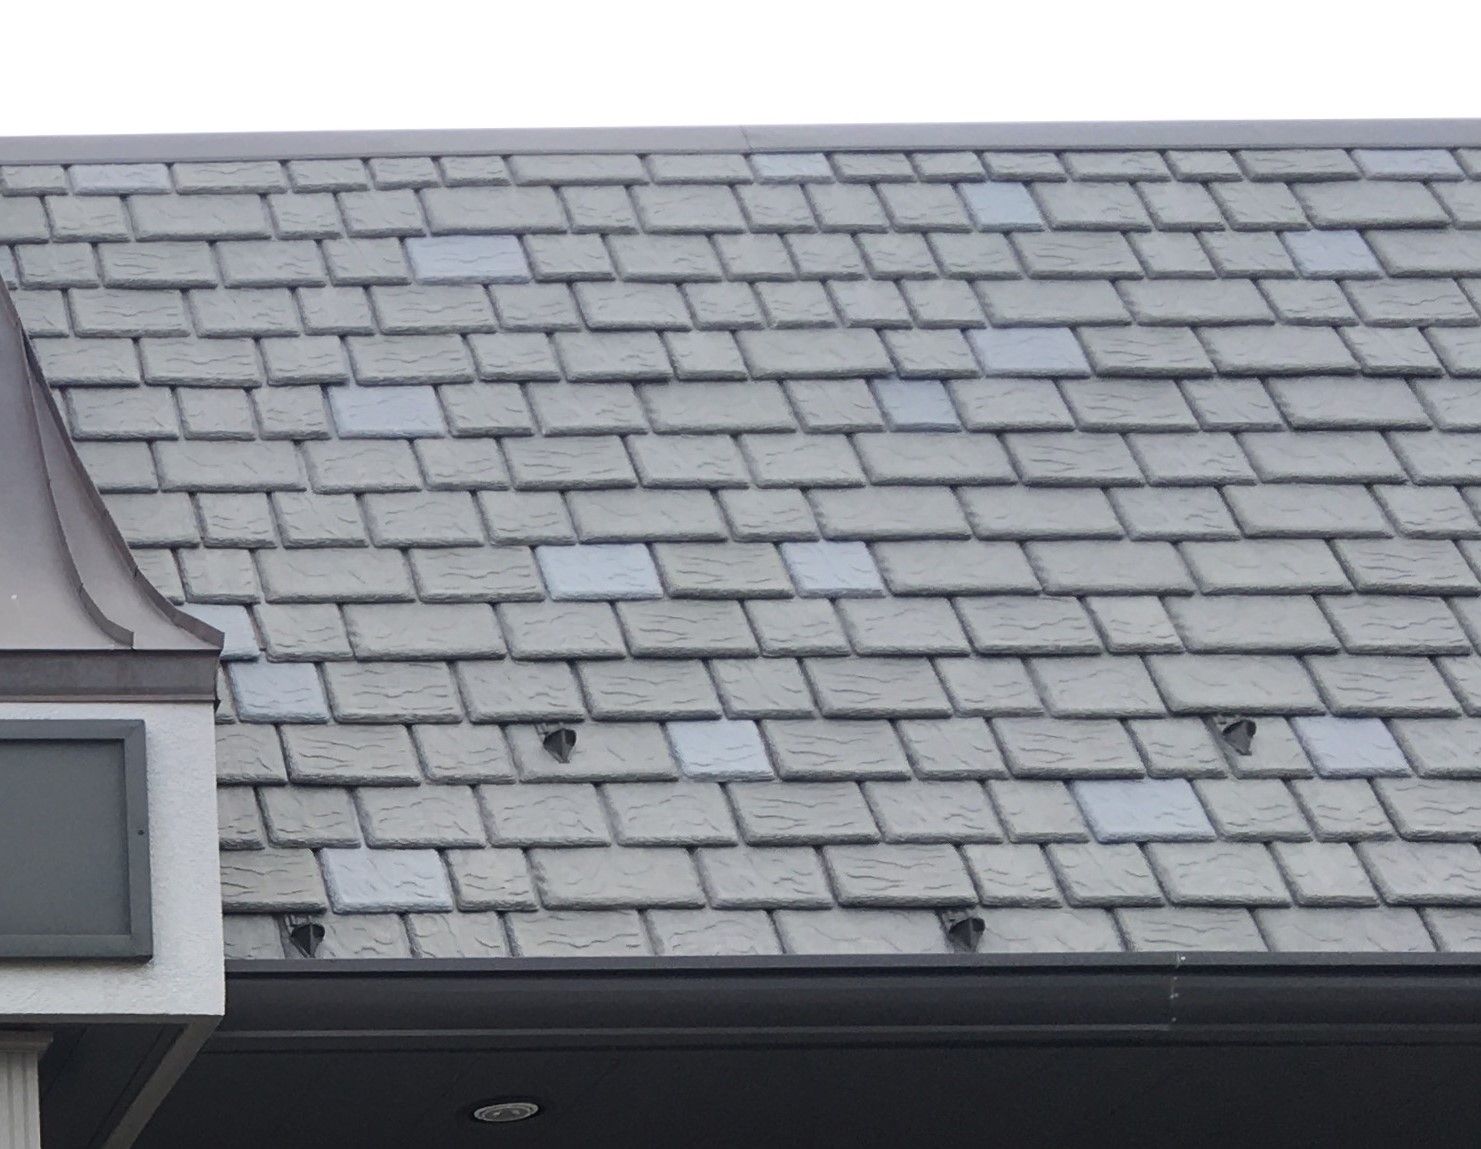 Mansard-style synthetic slate roof with installed snow guards for enhanced winter safety